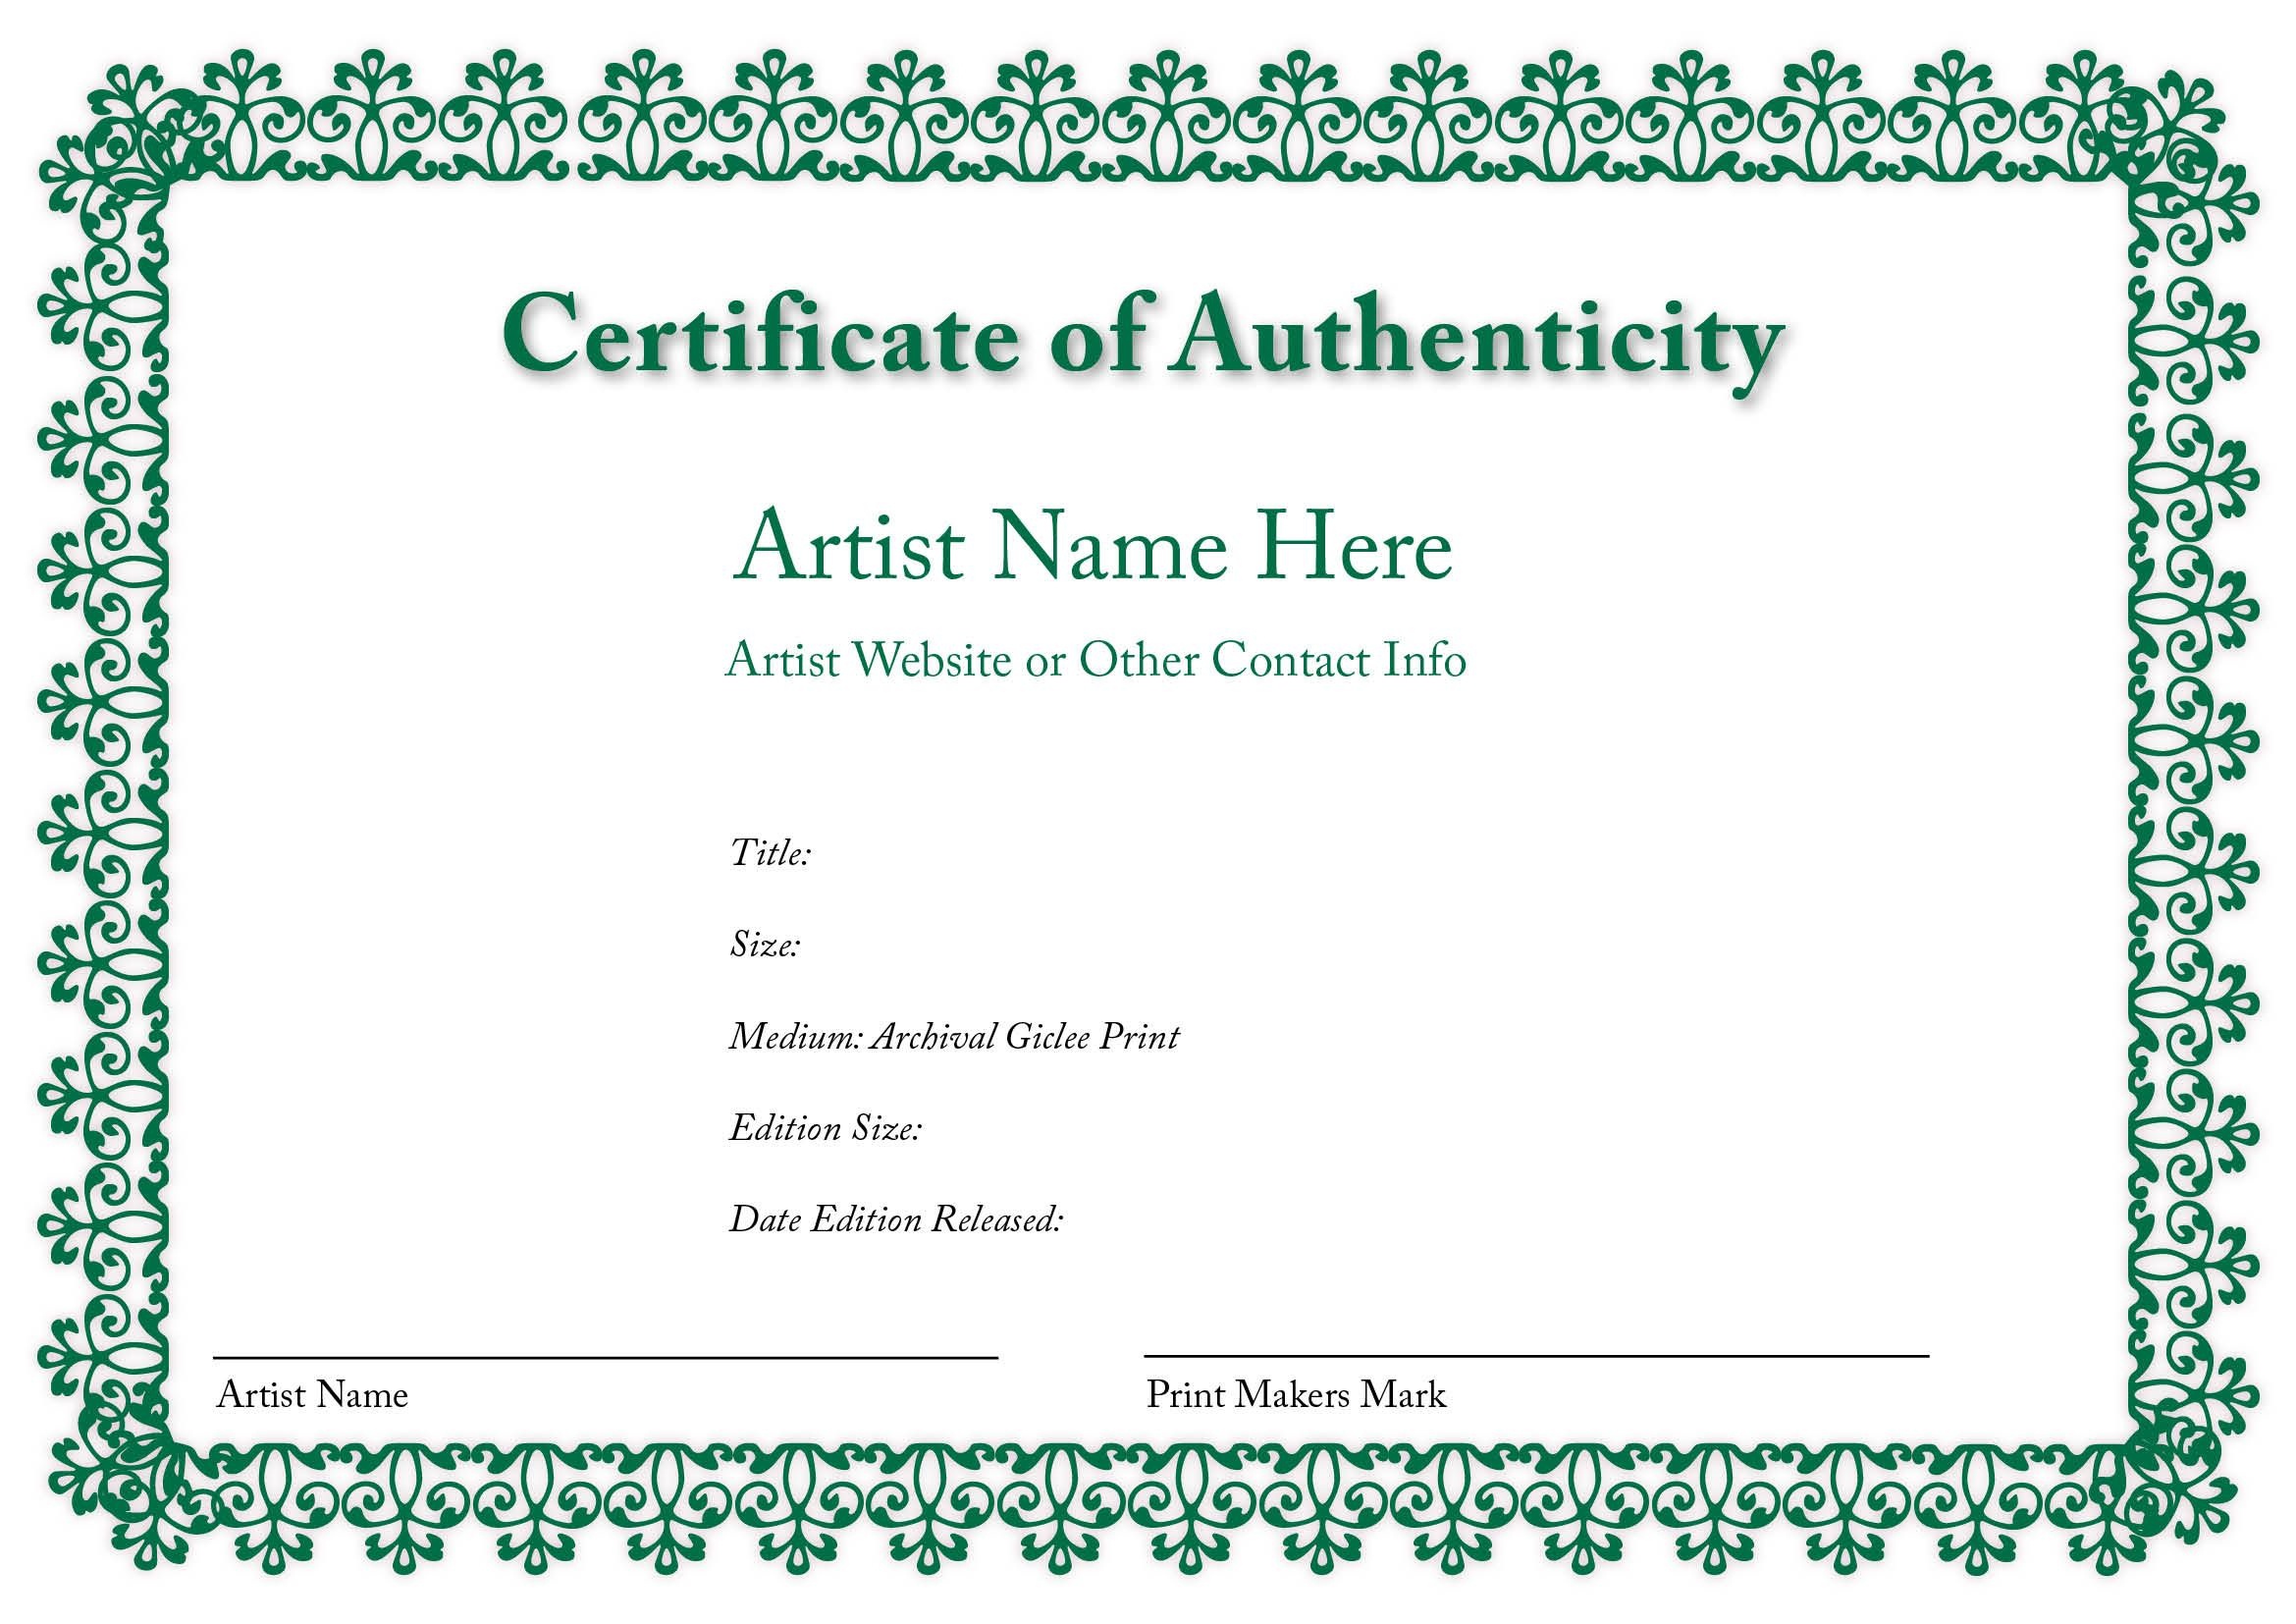 Certificate Of Authenticity Of An Art Print | Certificates Of - Fake Adoption Certificate Free Printable